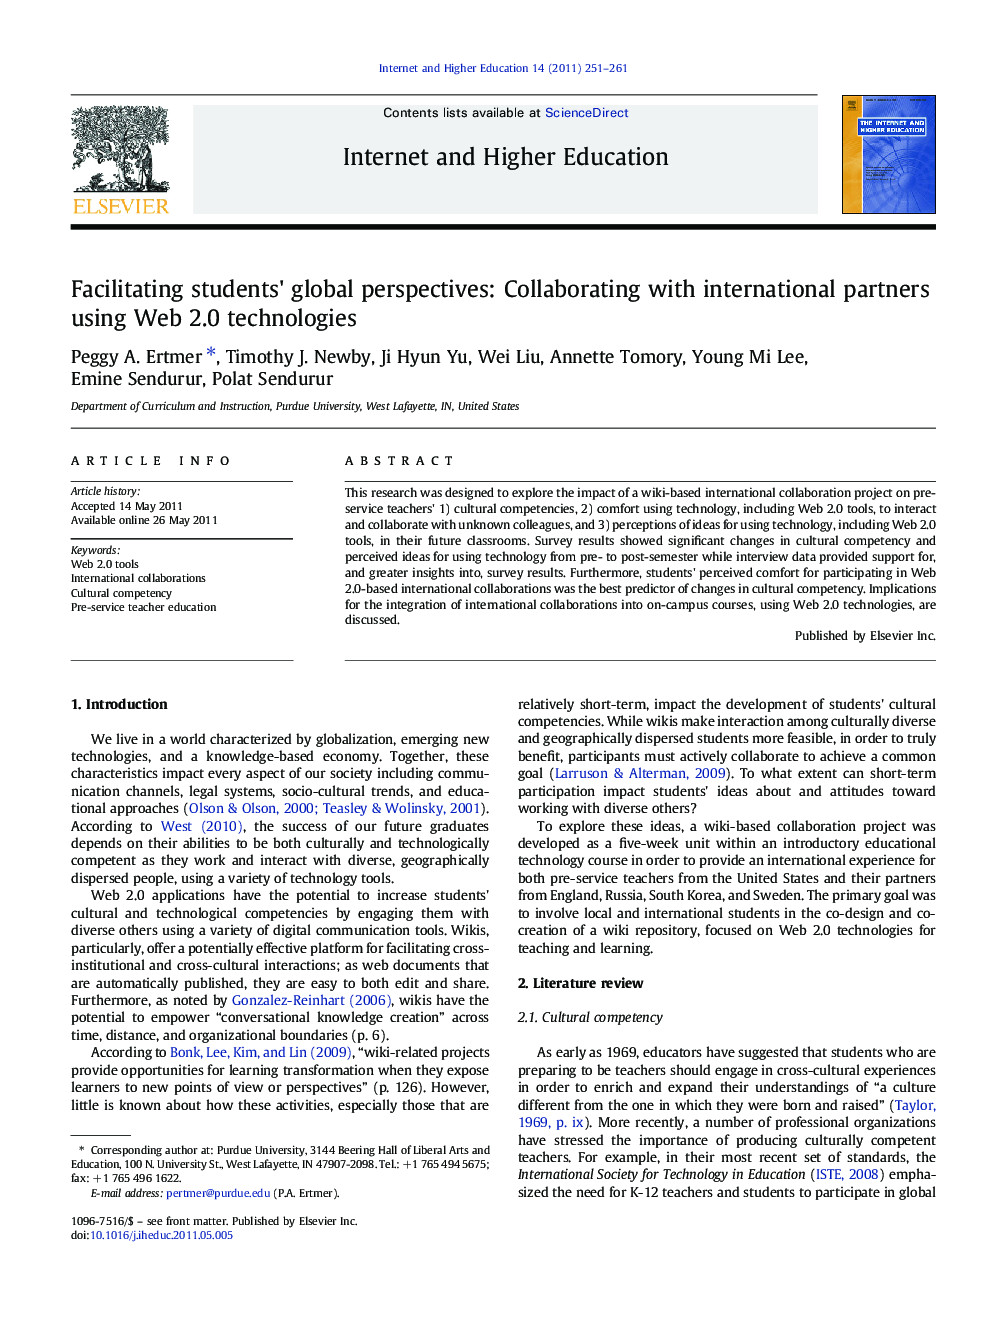 Facilitating students' global perspectives: Collaborating with international partners using Web 2.0 technologies